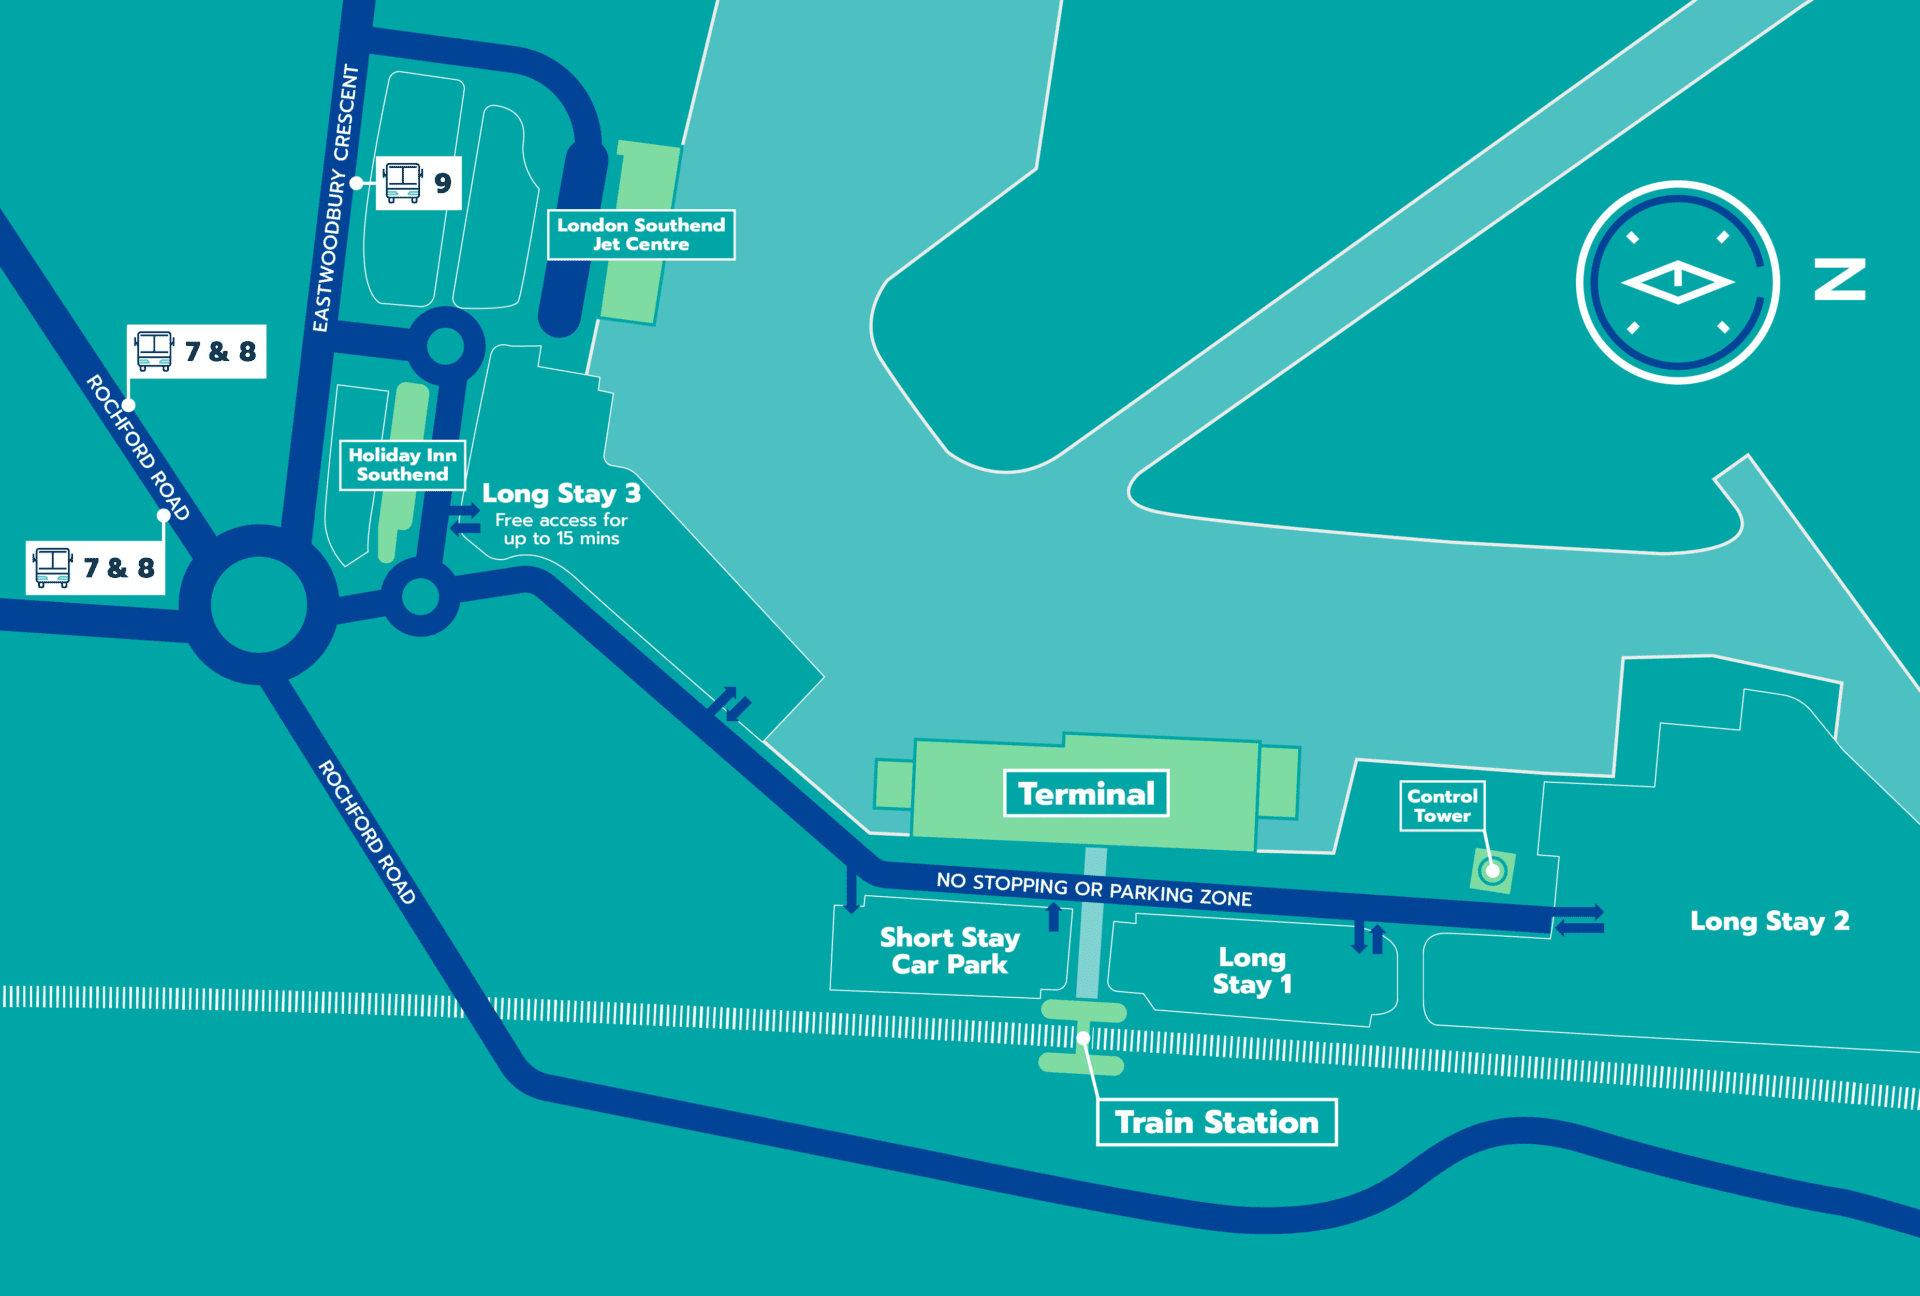 Map of bus stops around London Southend Airport, including routes 7, 8 and 9 from Arriva